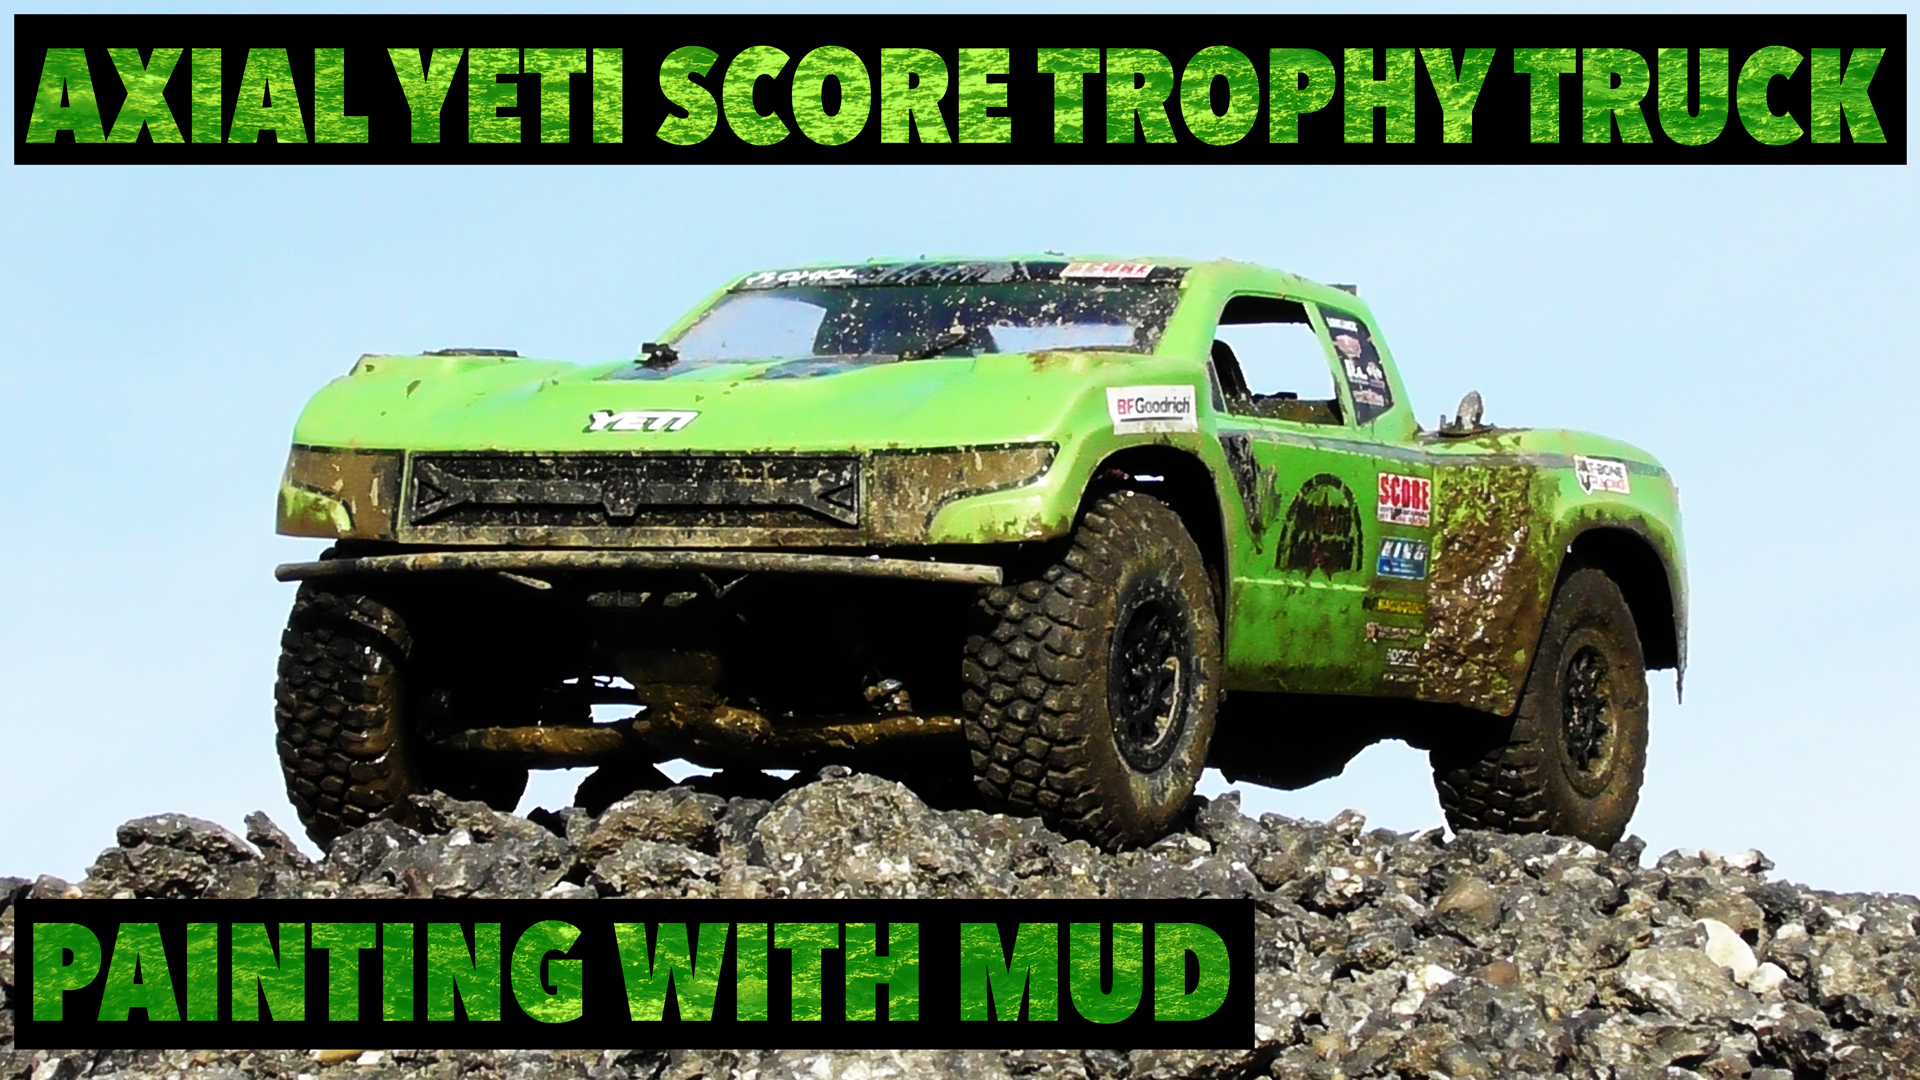 Axial Yeti Score Trophy Truck - Painting with mud